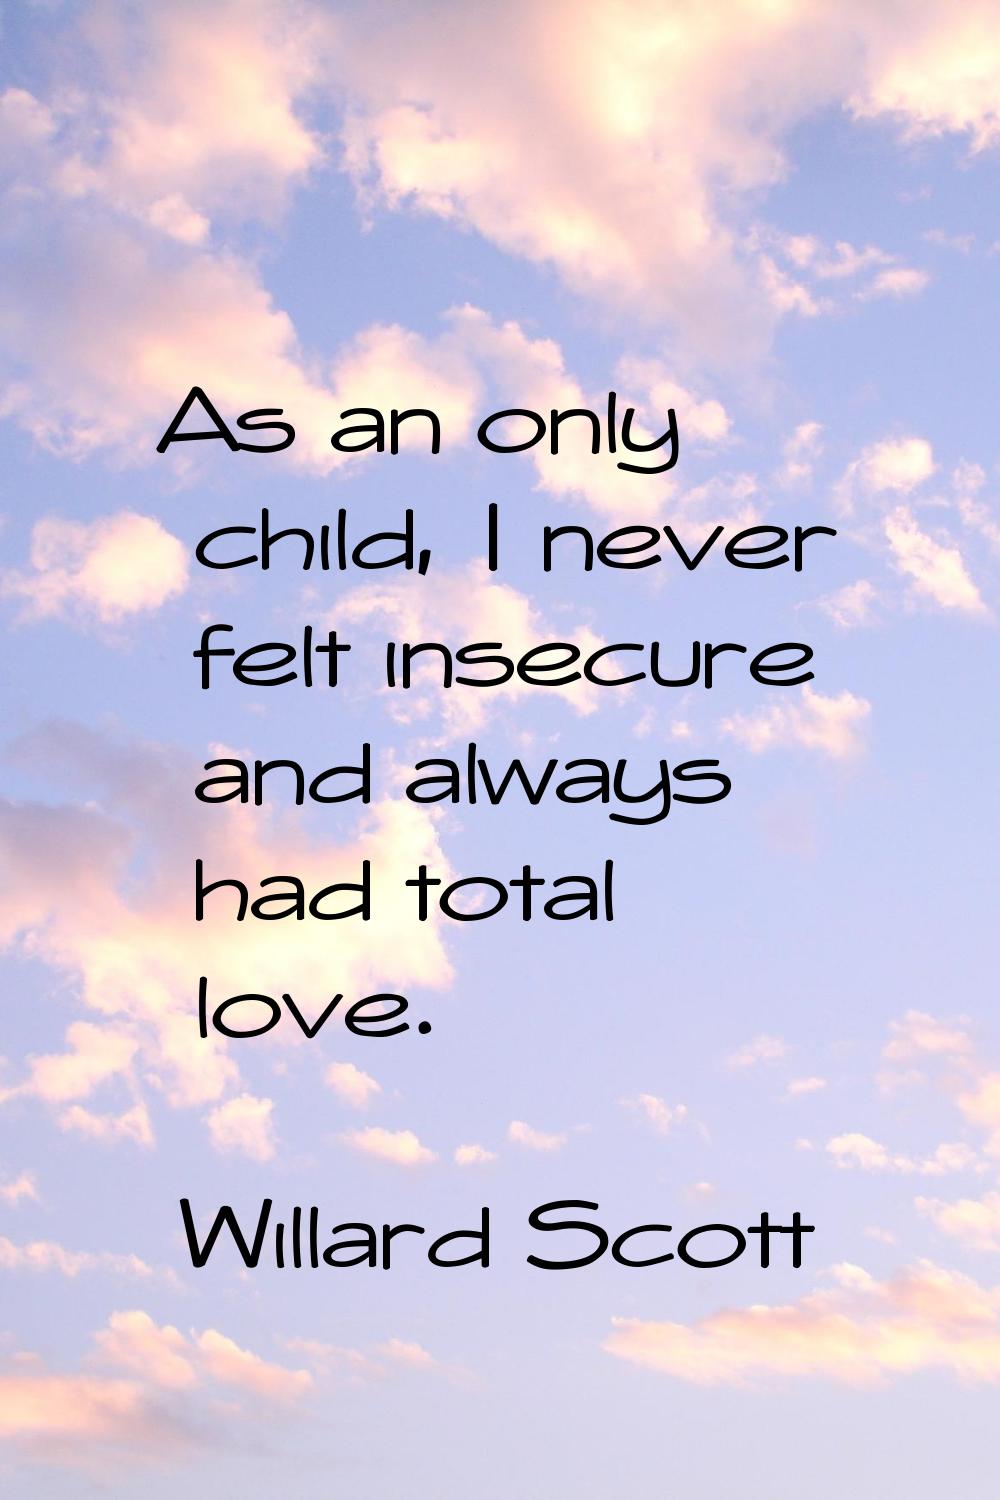 As an only child, I never felt insecure and always had total love.